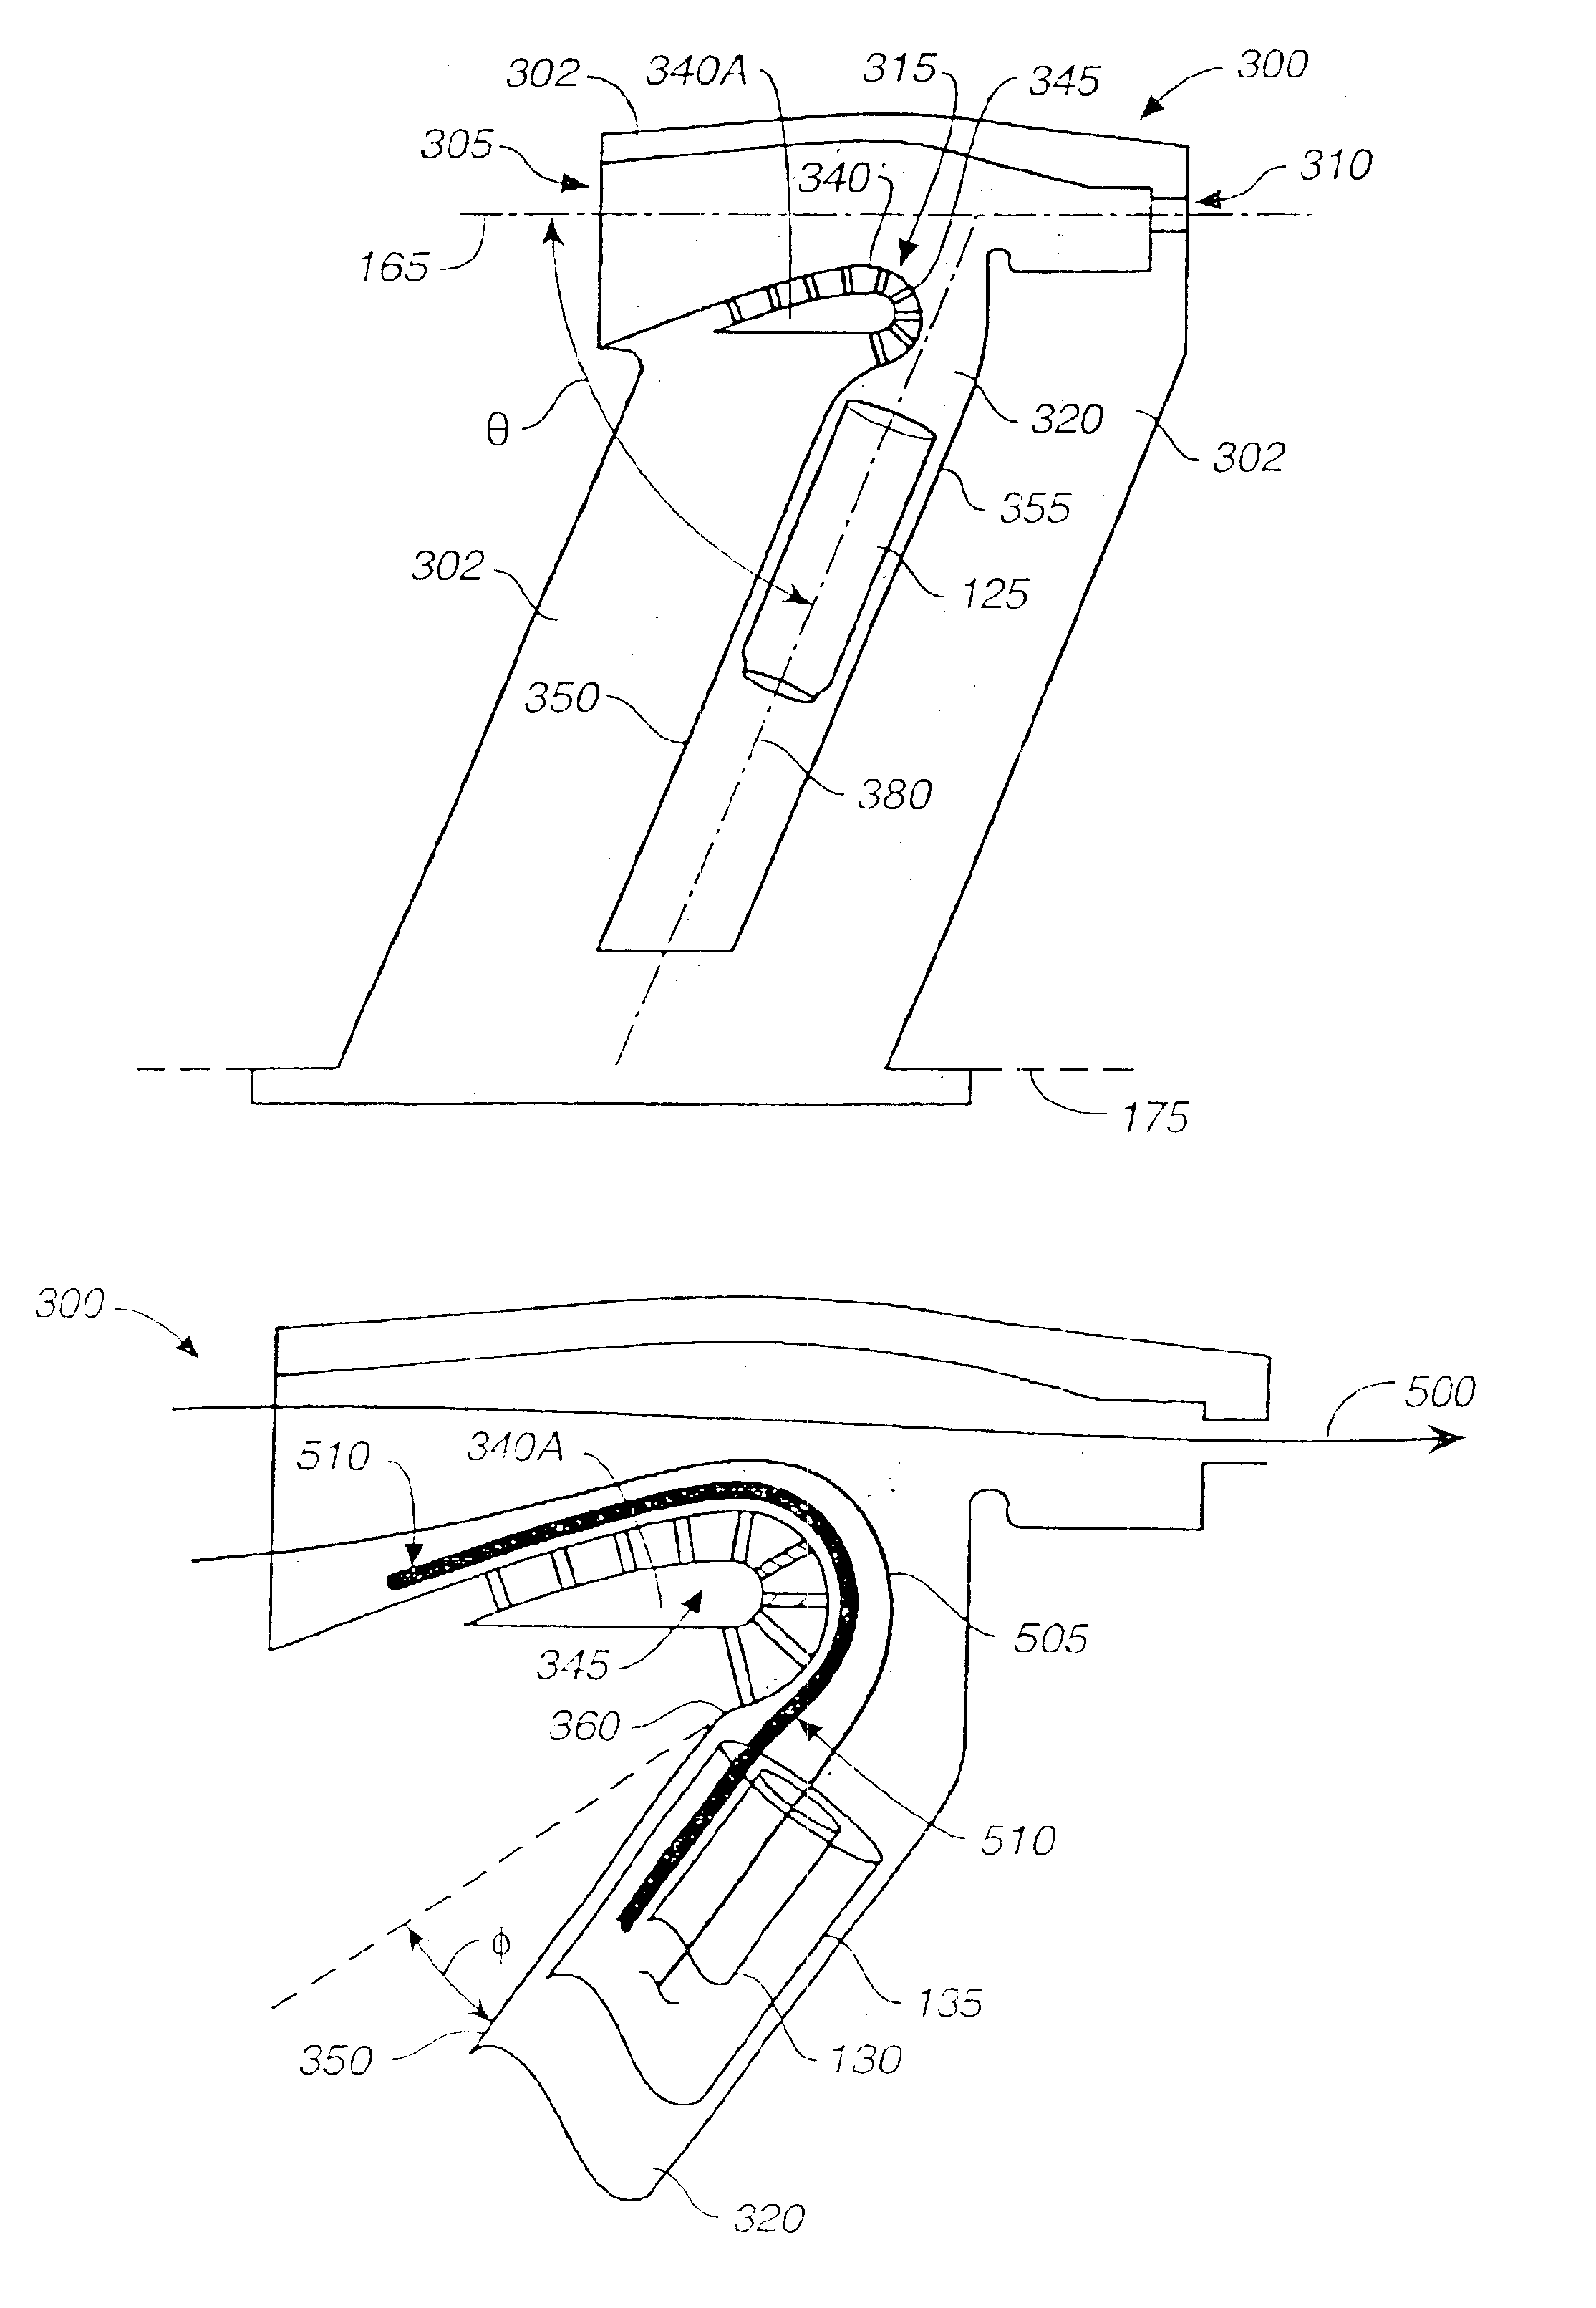 Total air temperature probe providing improved anti-icing performance and reduced deicing heater error